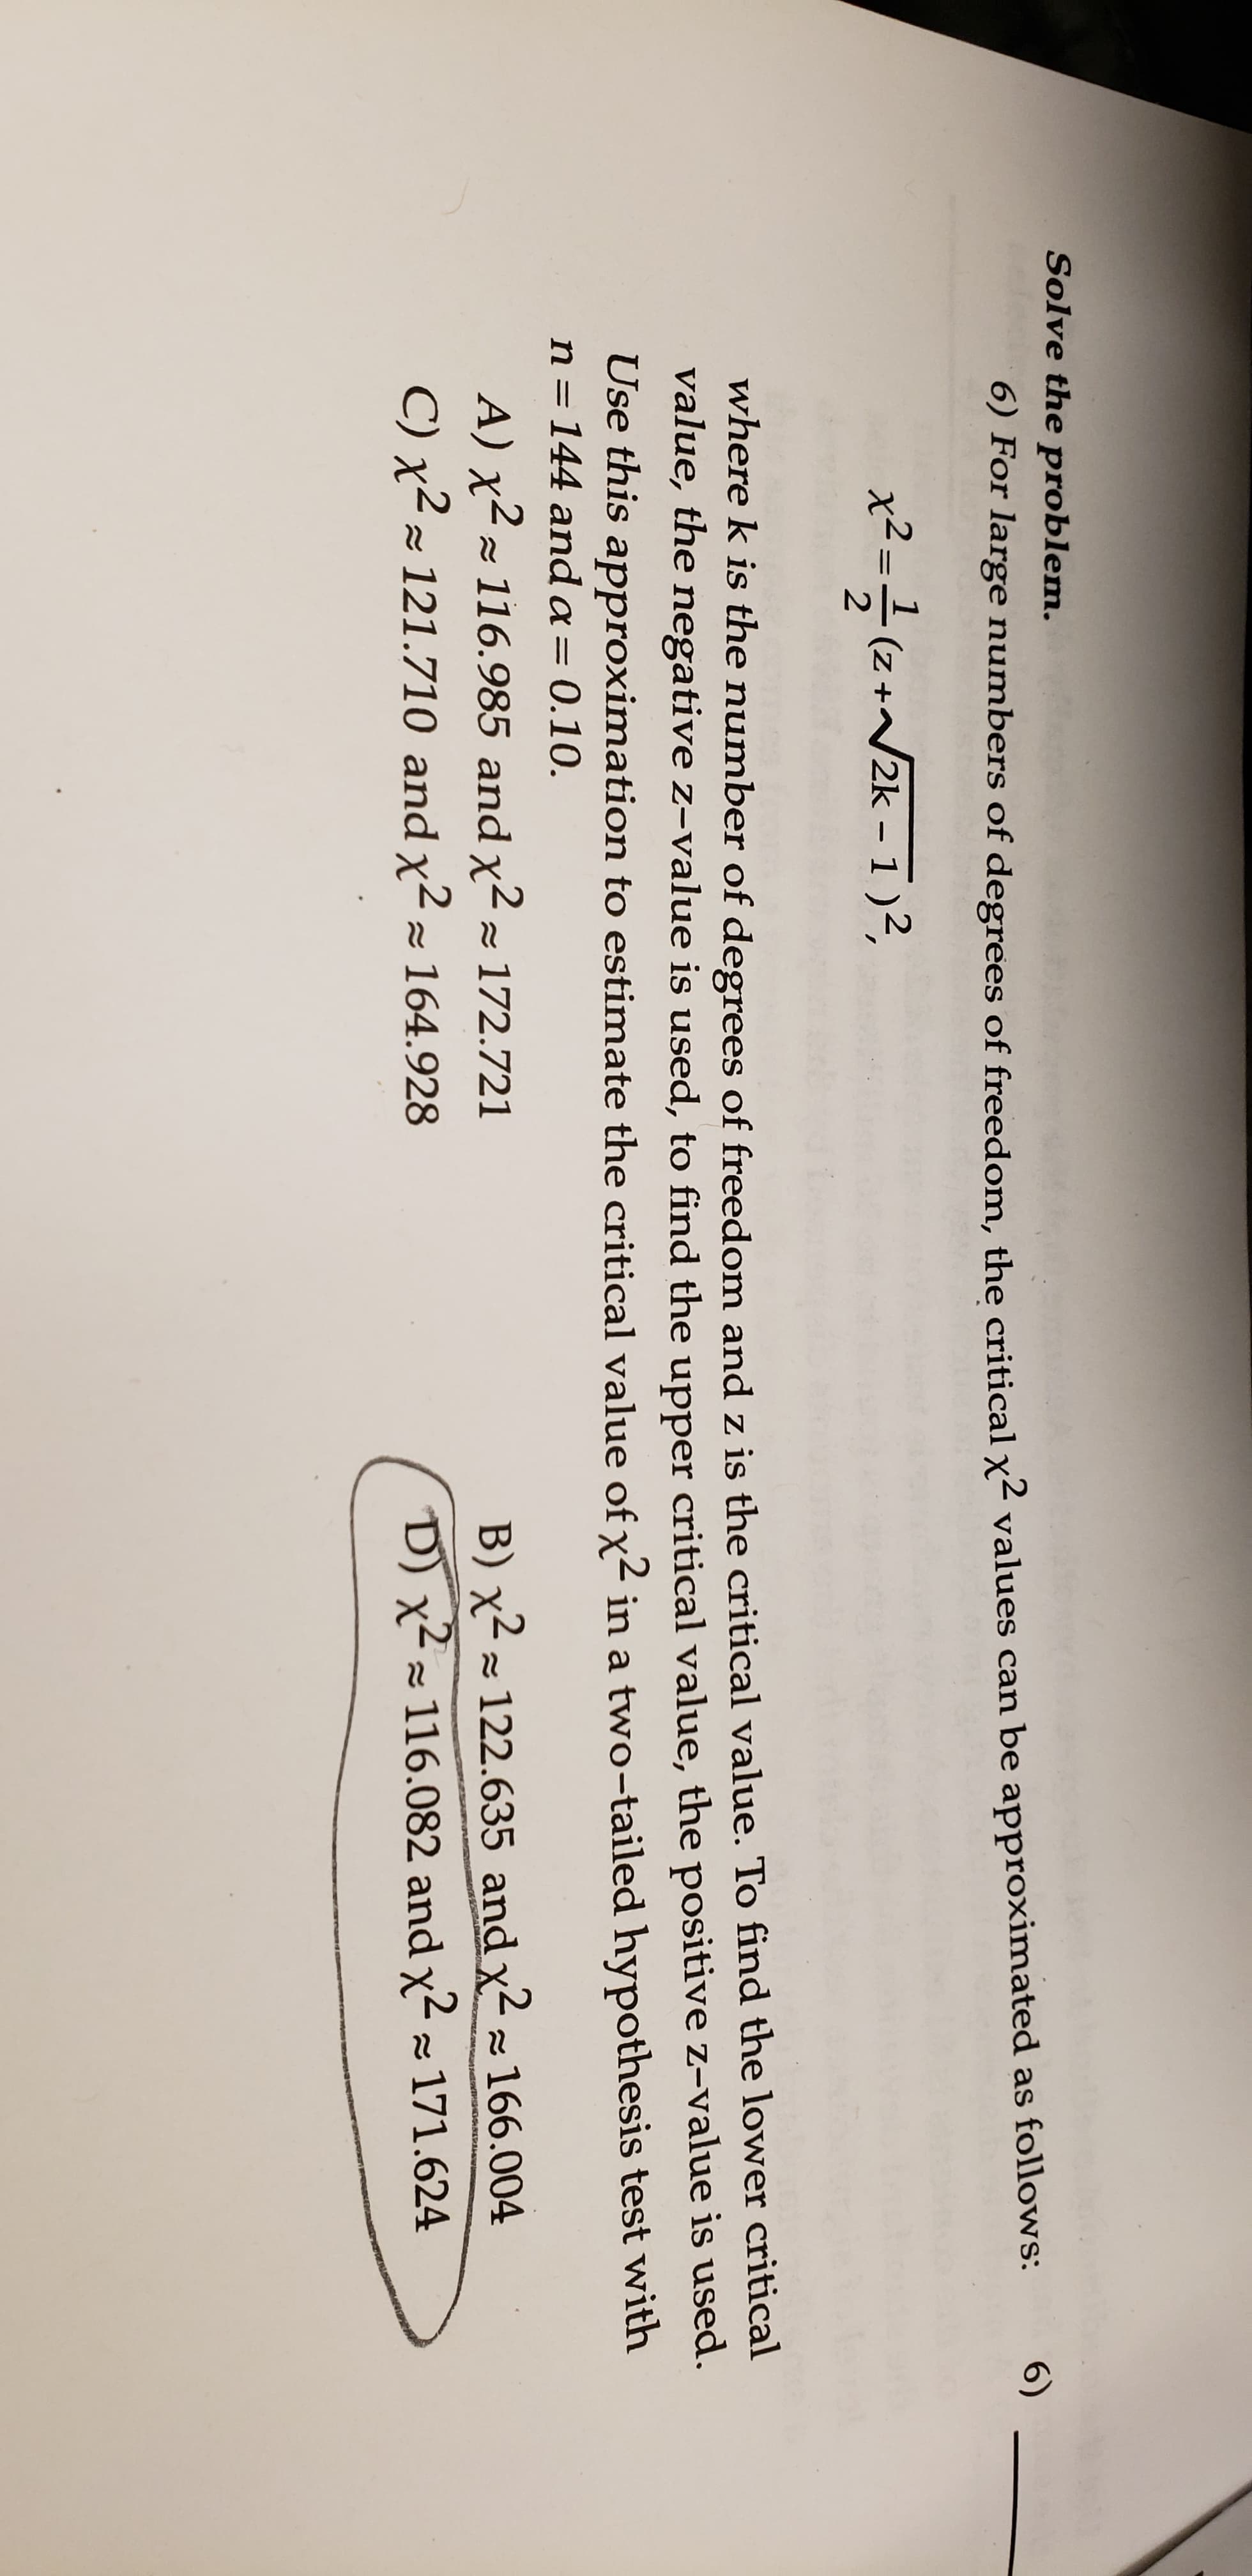 Solve the problem.
6)
6) For large numbers of degrees of freedom, the critical x values can be approximated as follows:
x2-(z+2k -1)2.
Z +
where k is the number of degrees of freedom and z is the critical value. To find the lower critical
value, the negative z-value is used, to find the upper critical value, the positive z-value is used.
Use this approximation to estimate the critical value of x2 in a two-tailed hypothesis test with
n = 144 anda= 0.10.
A) x 116.985 and x2 172.721
B) x122.635 and
x2 166.004
RAN
C) x2 121.710 and x2 164.928
D) x116.082 and x2 171.624
